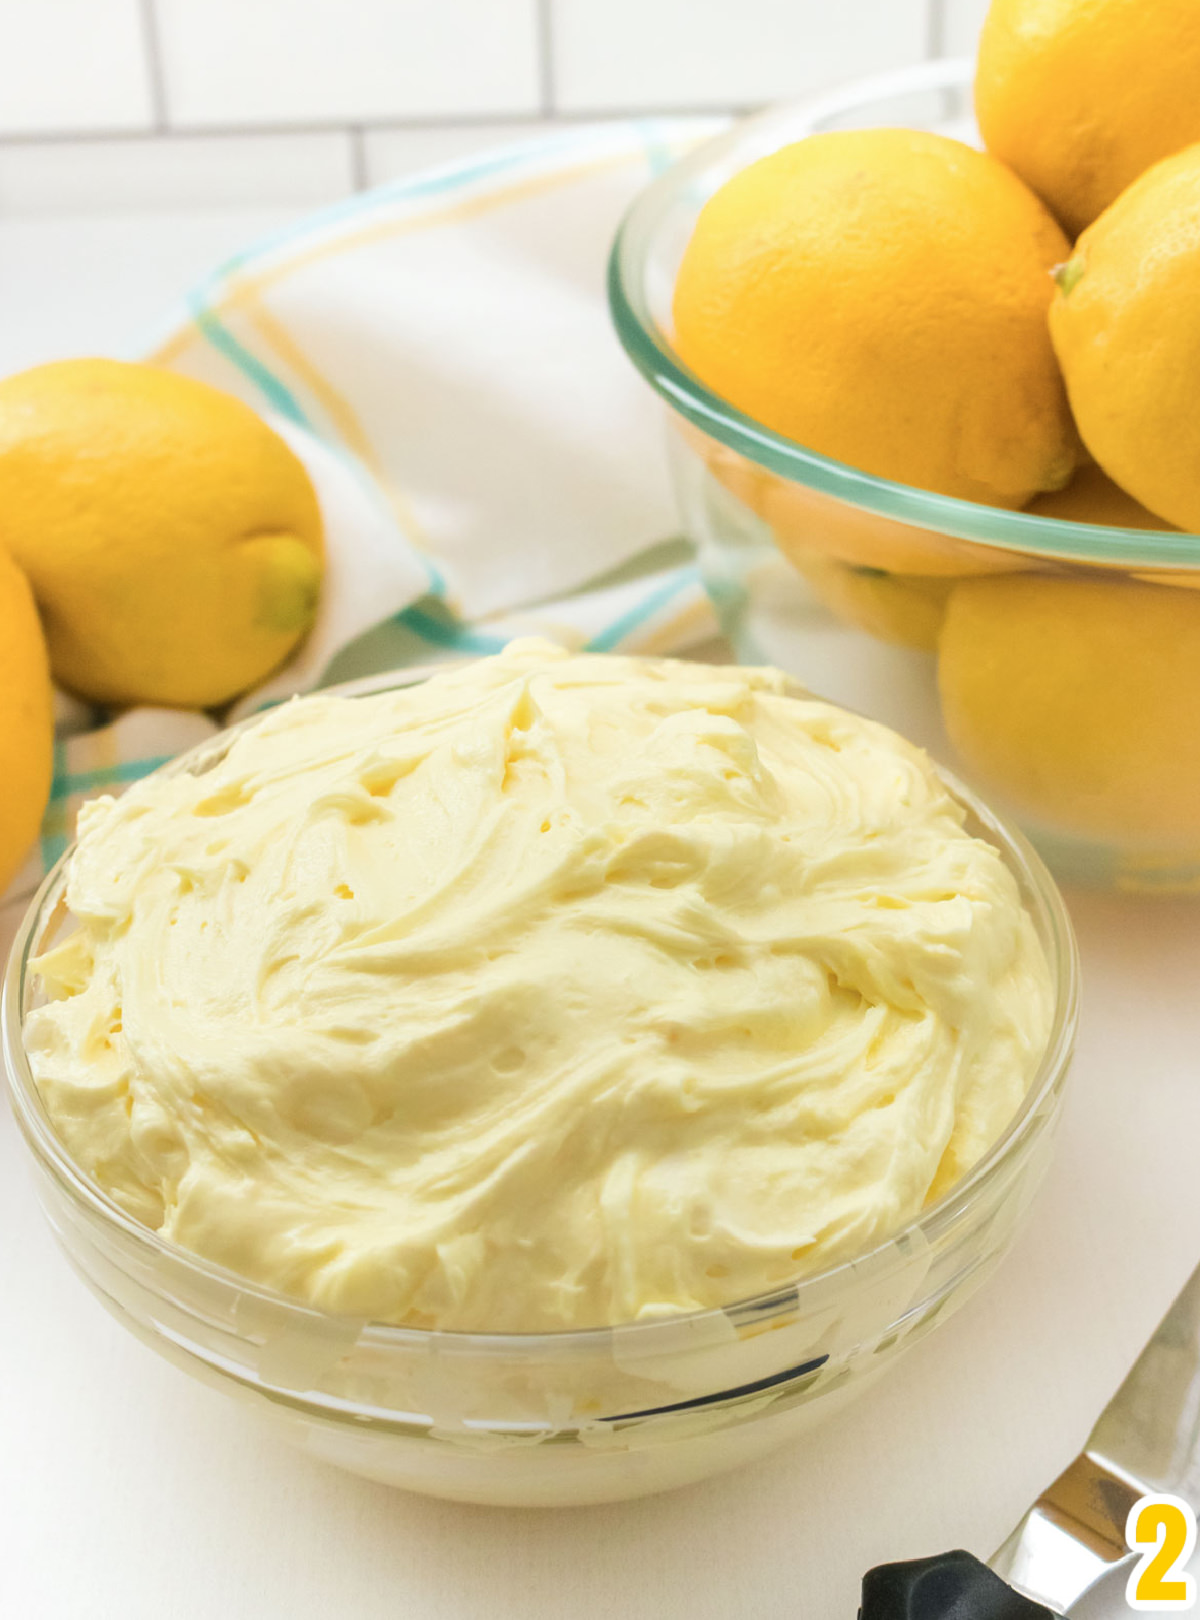 A glass bowl filled with Lemon Frosting sitting in front of a glass bowl filled with Lemons.